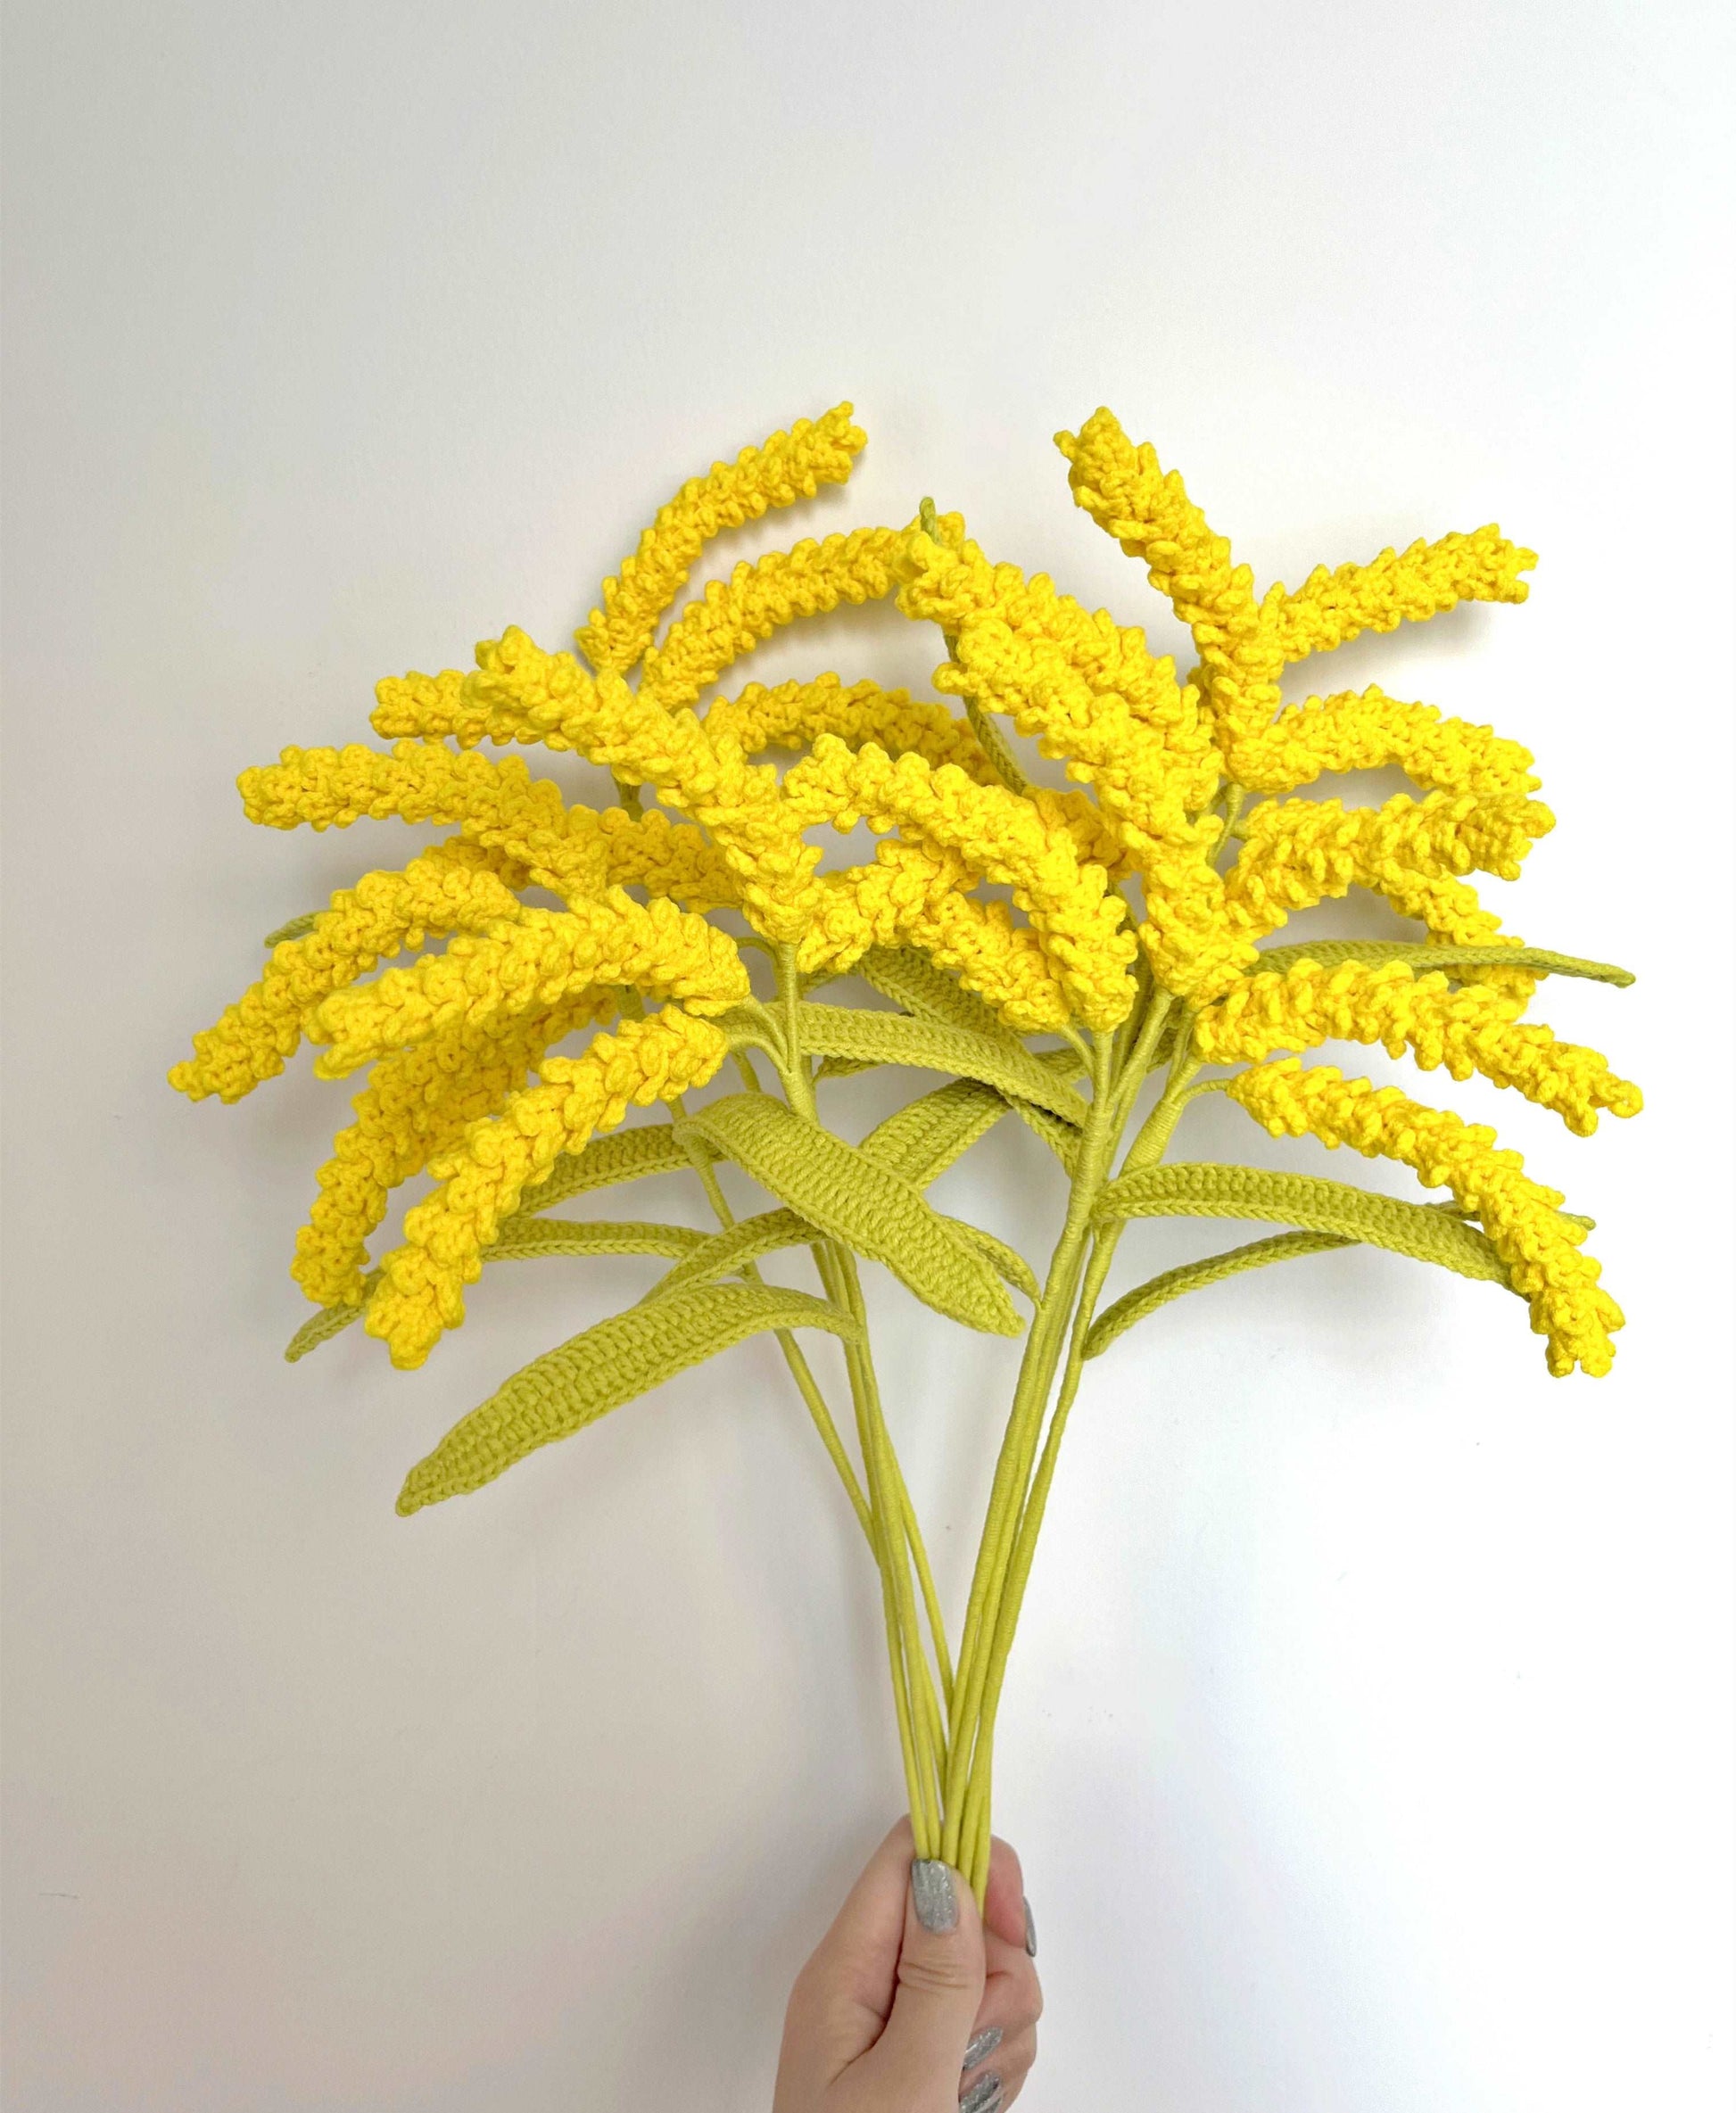 Exquisite Handwoven Wheat Stalk Bouquet for Gifting